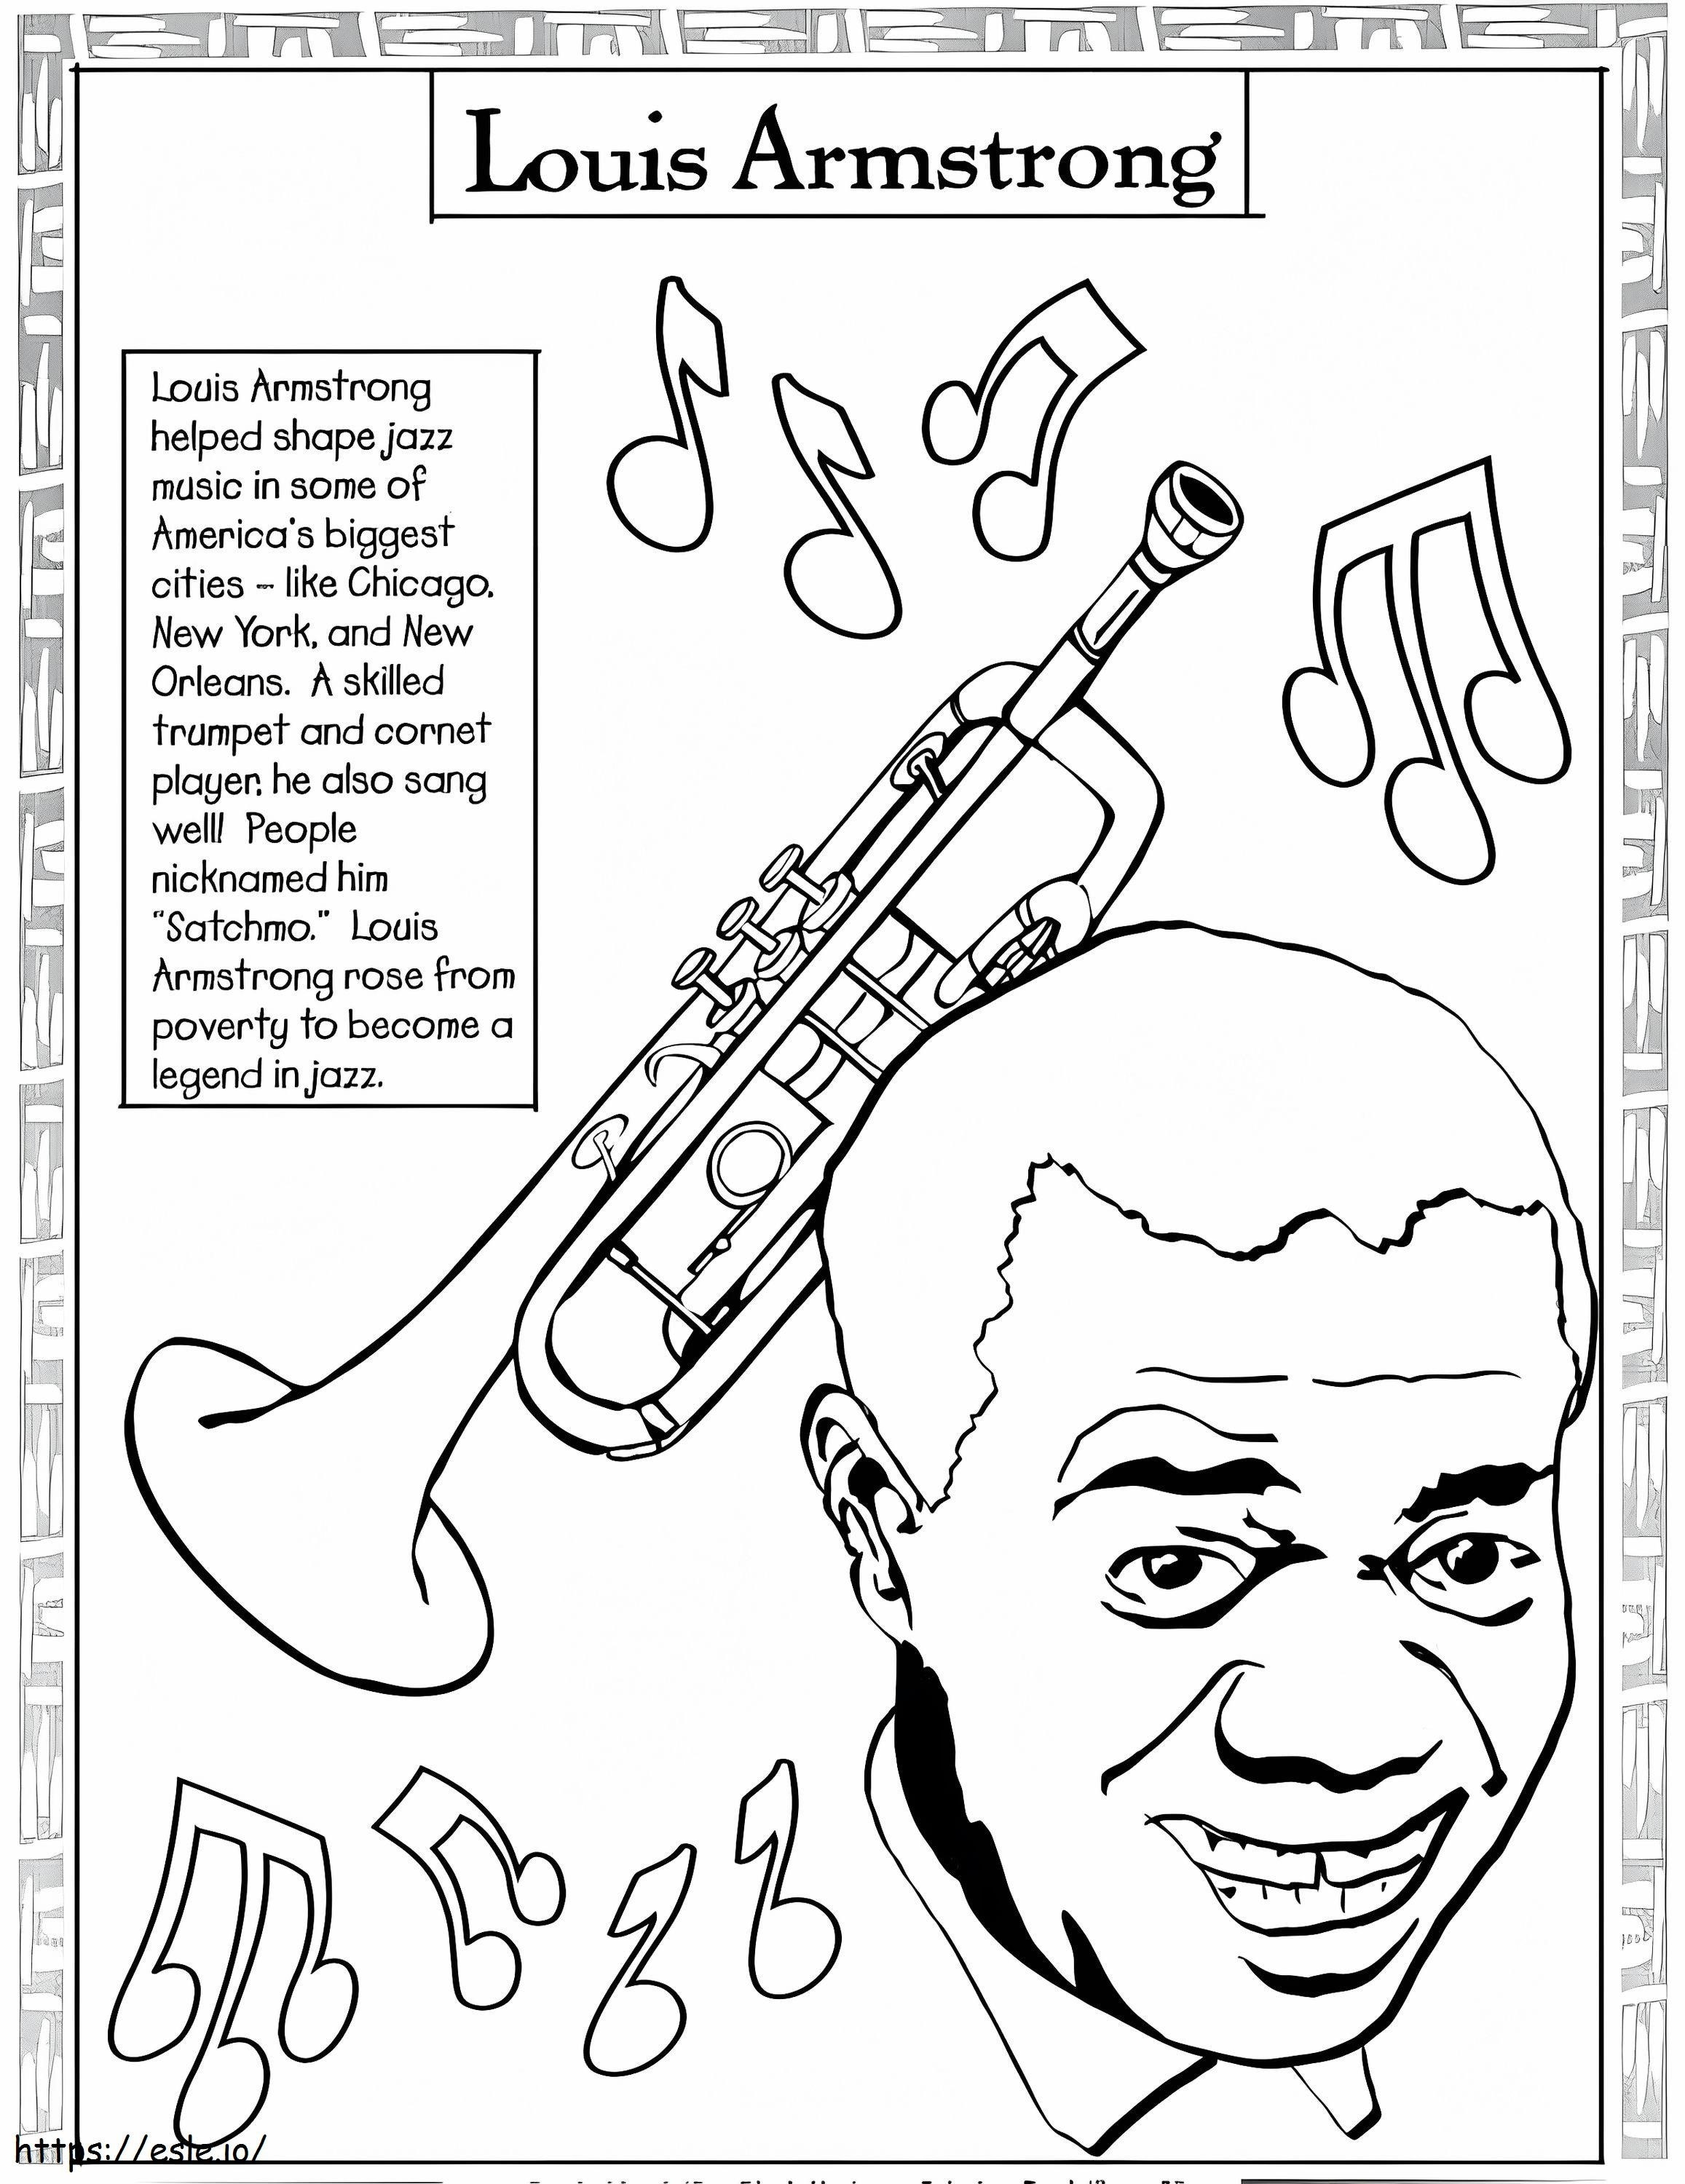 Black History Month 7 1 coloring page